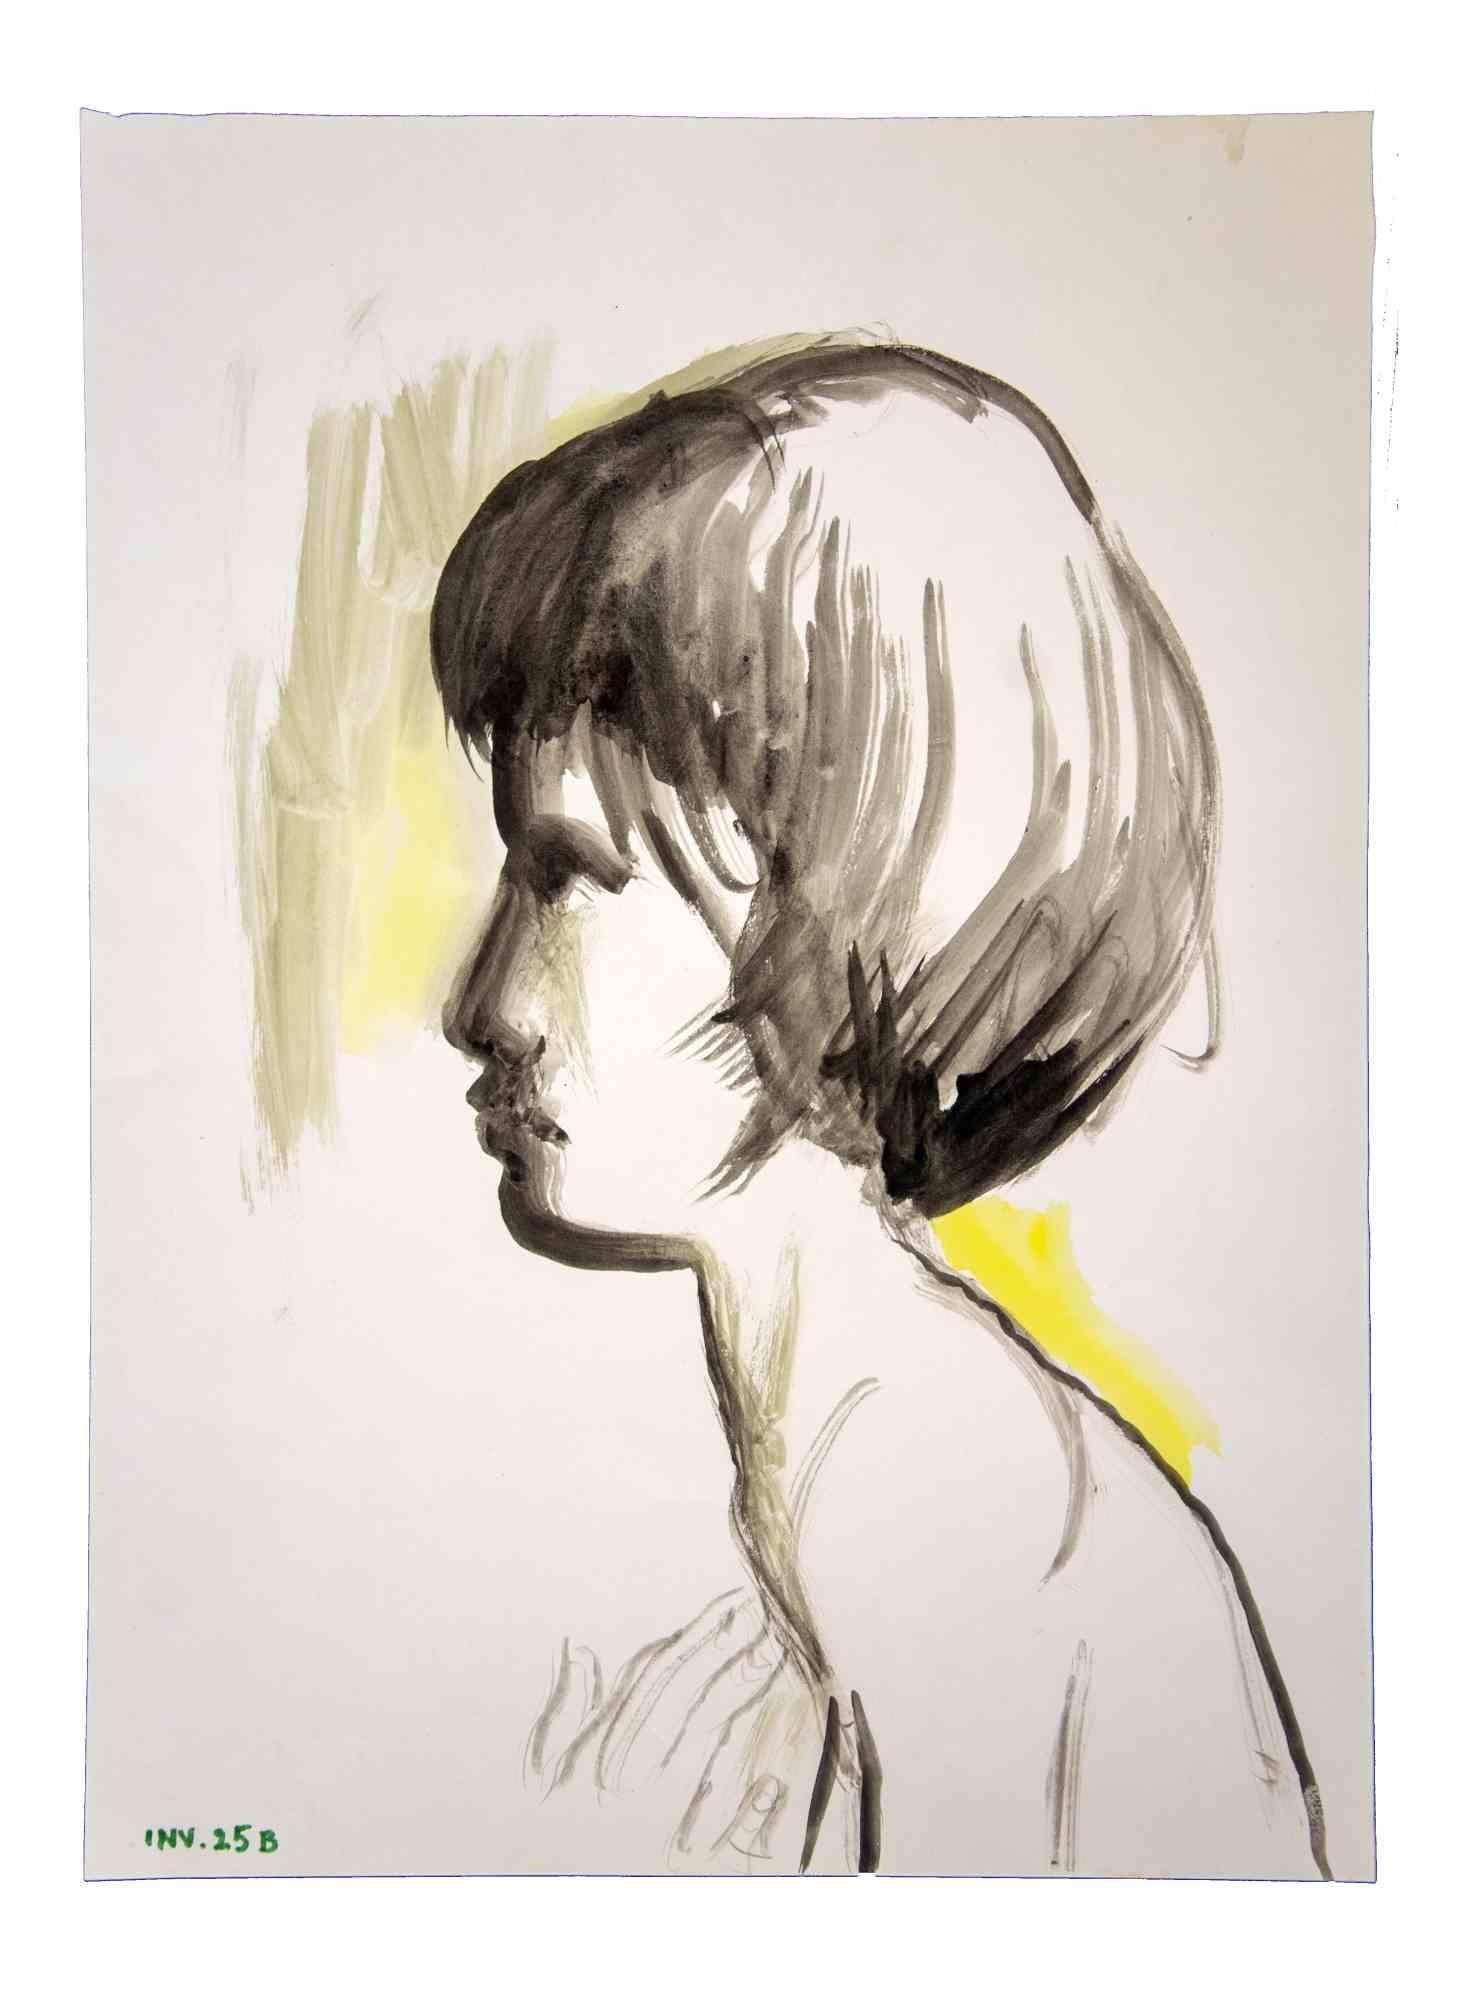 Portrait is an original artwork realized in the 1970s by the Italian Contemporary artist  Leo Guida  (1992 - 2017).

Original drawings in Watercolor on paper.

Good conditions but aged.

The artwork is depicted through strong strokes in